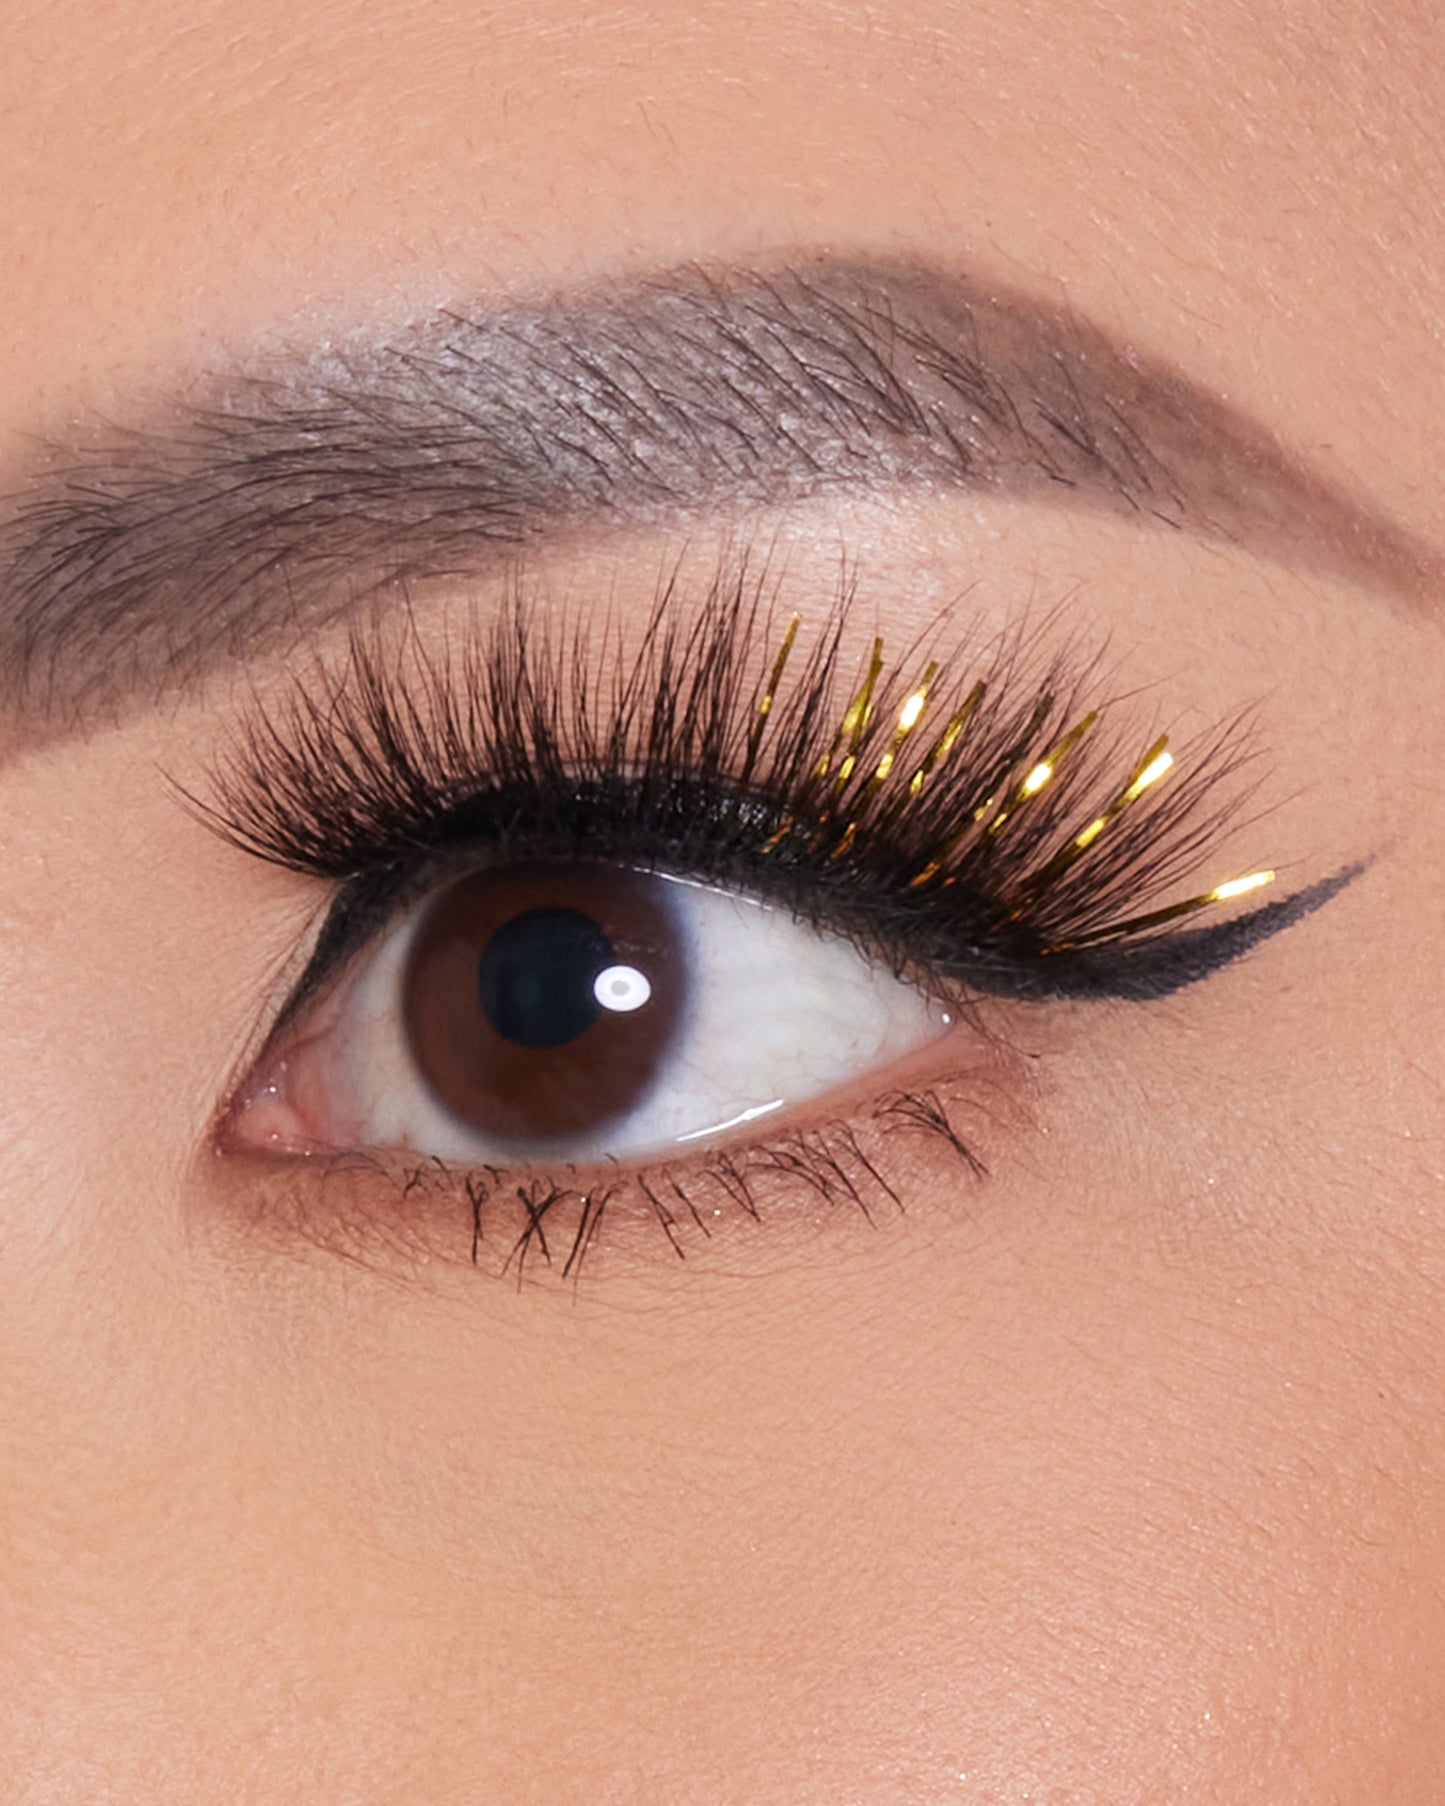 Life of the Party Tinsel Lash